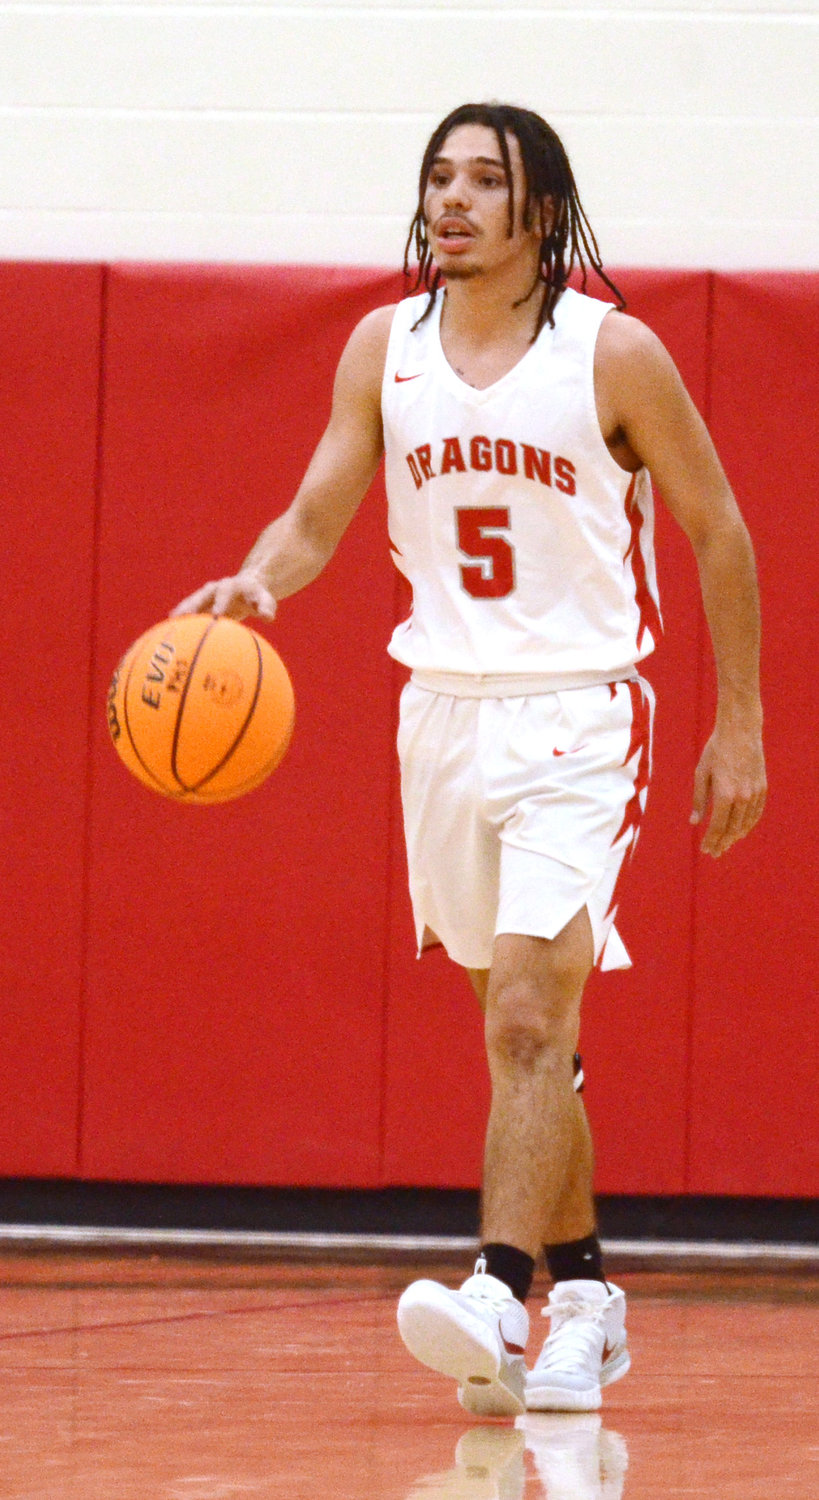 Purcell junior Malachi Evans dribbles the ball up the floor for the Dragons. Evans led Purcell with 19 points in their 69-59 win over Harding Prep last Saturday.